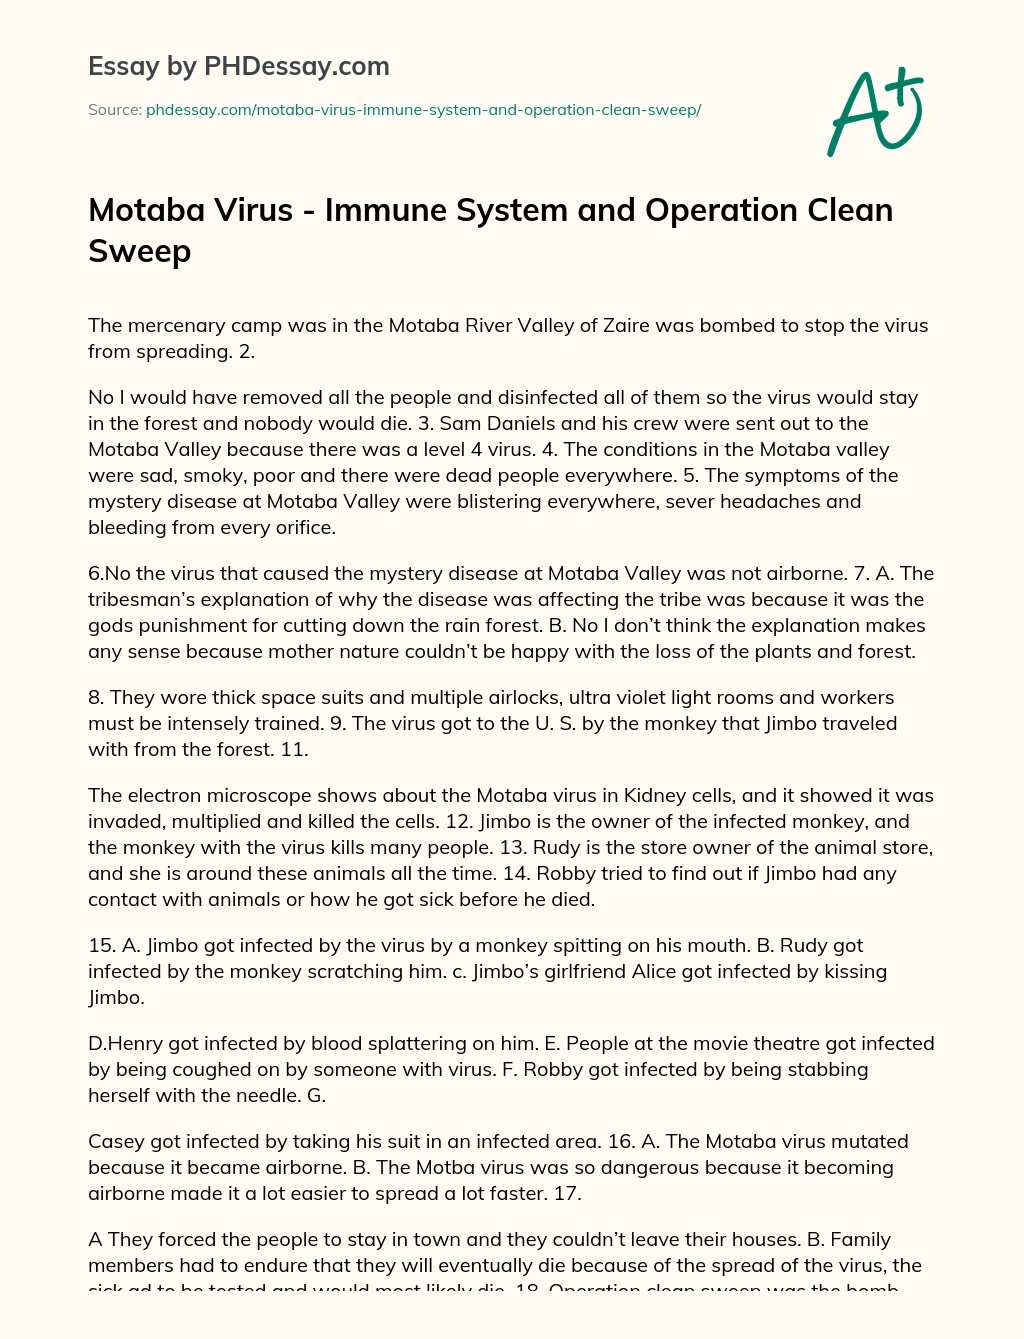 Motaba Virus – Immune System and Operation Clean Sweep essay